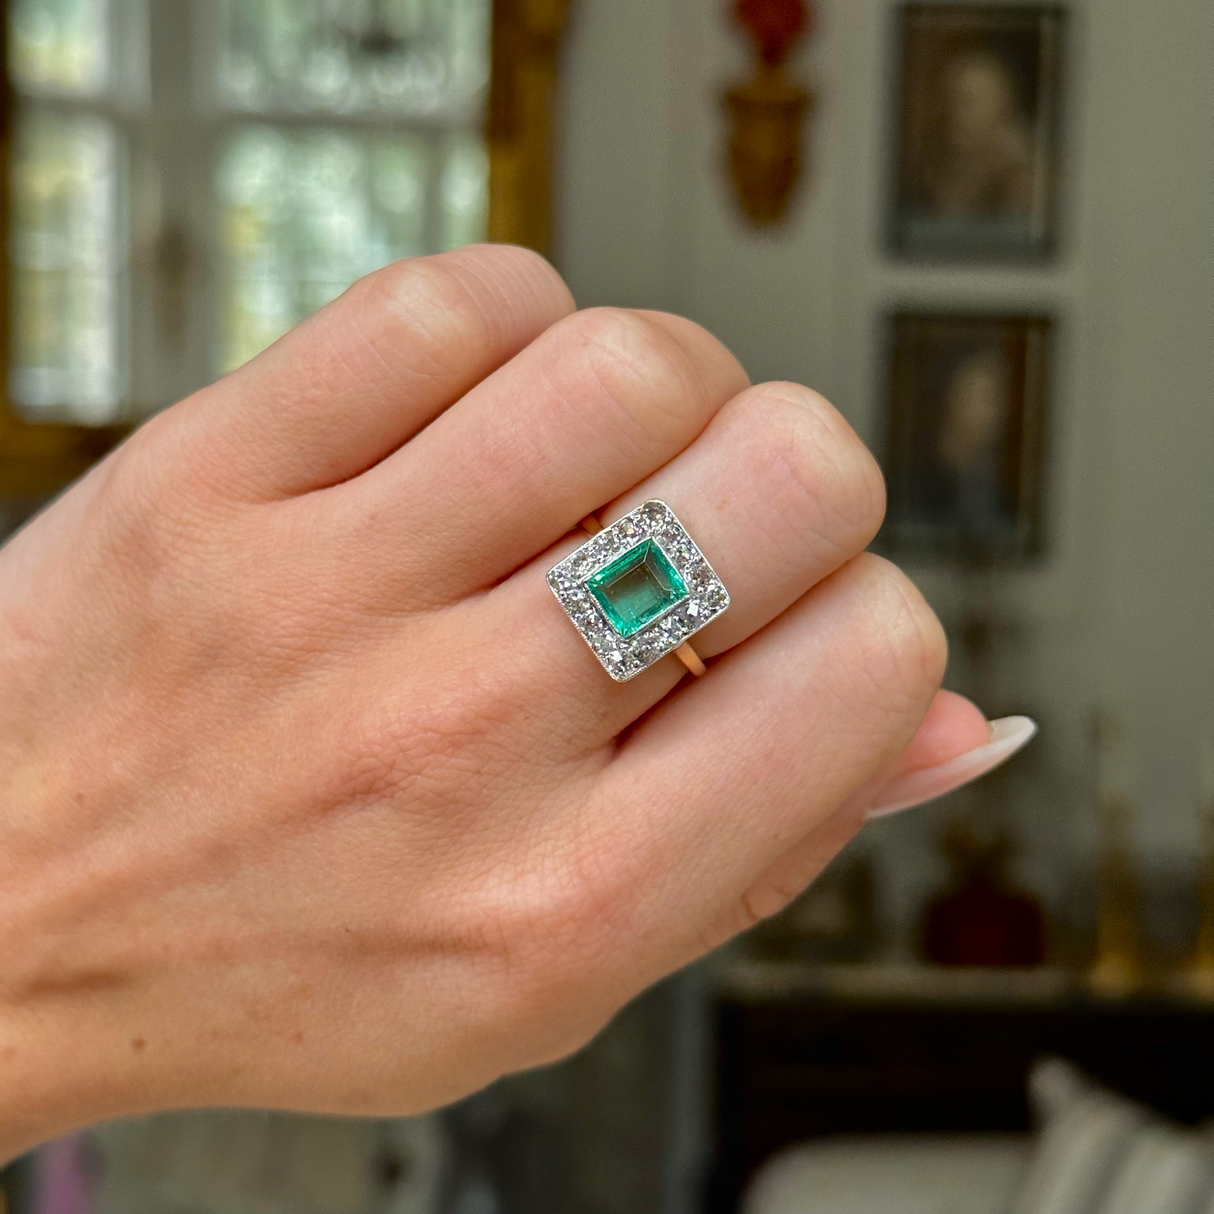 square-cut emerald and diamond cluster ring, worn closed hand, front view.